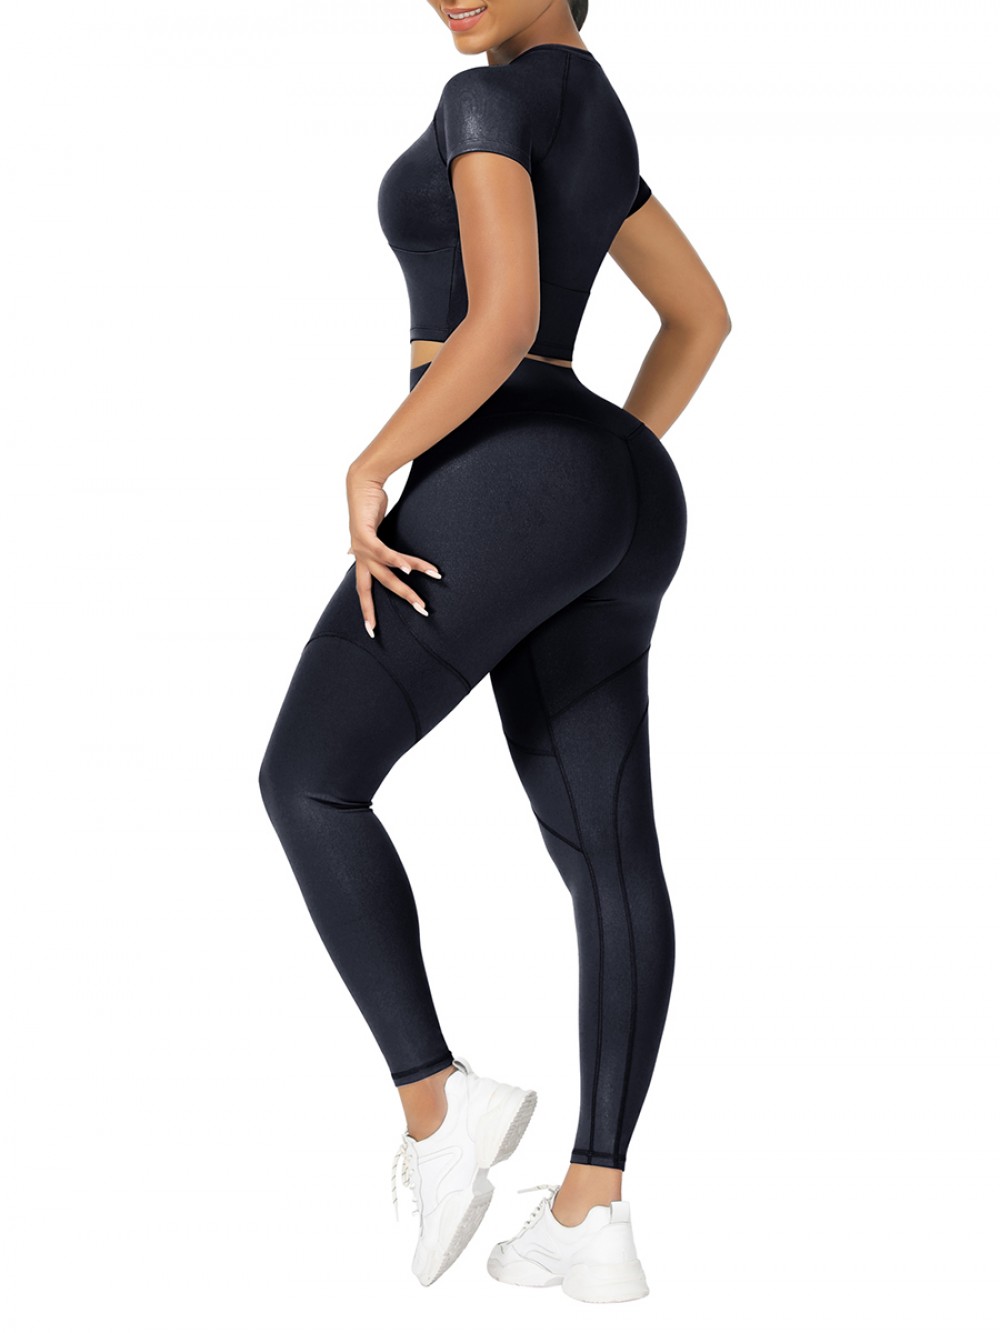 Black Short Sleeves High Waist Yoga Suits For Fitness